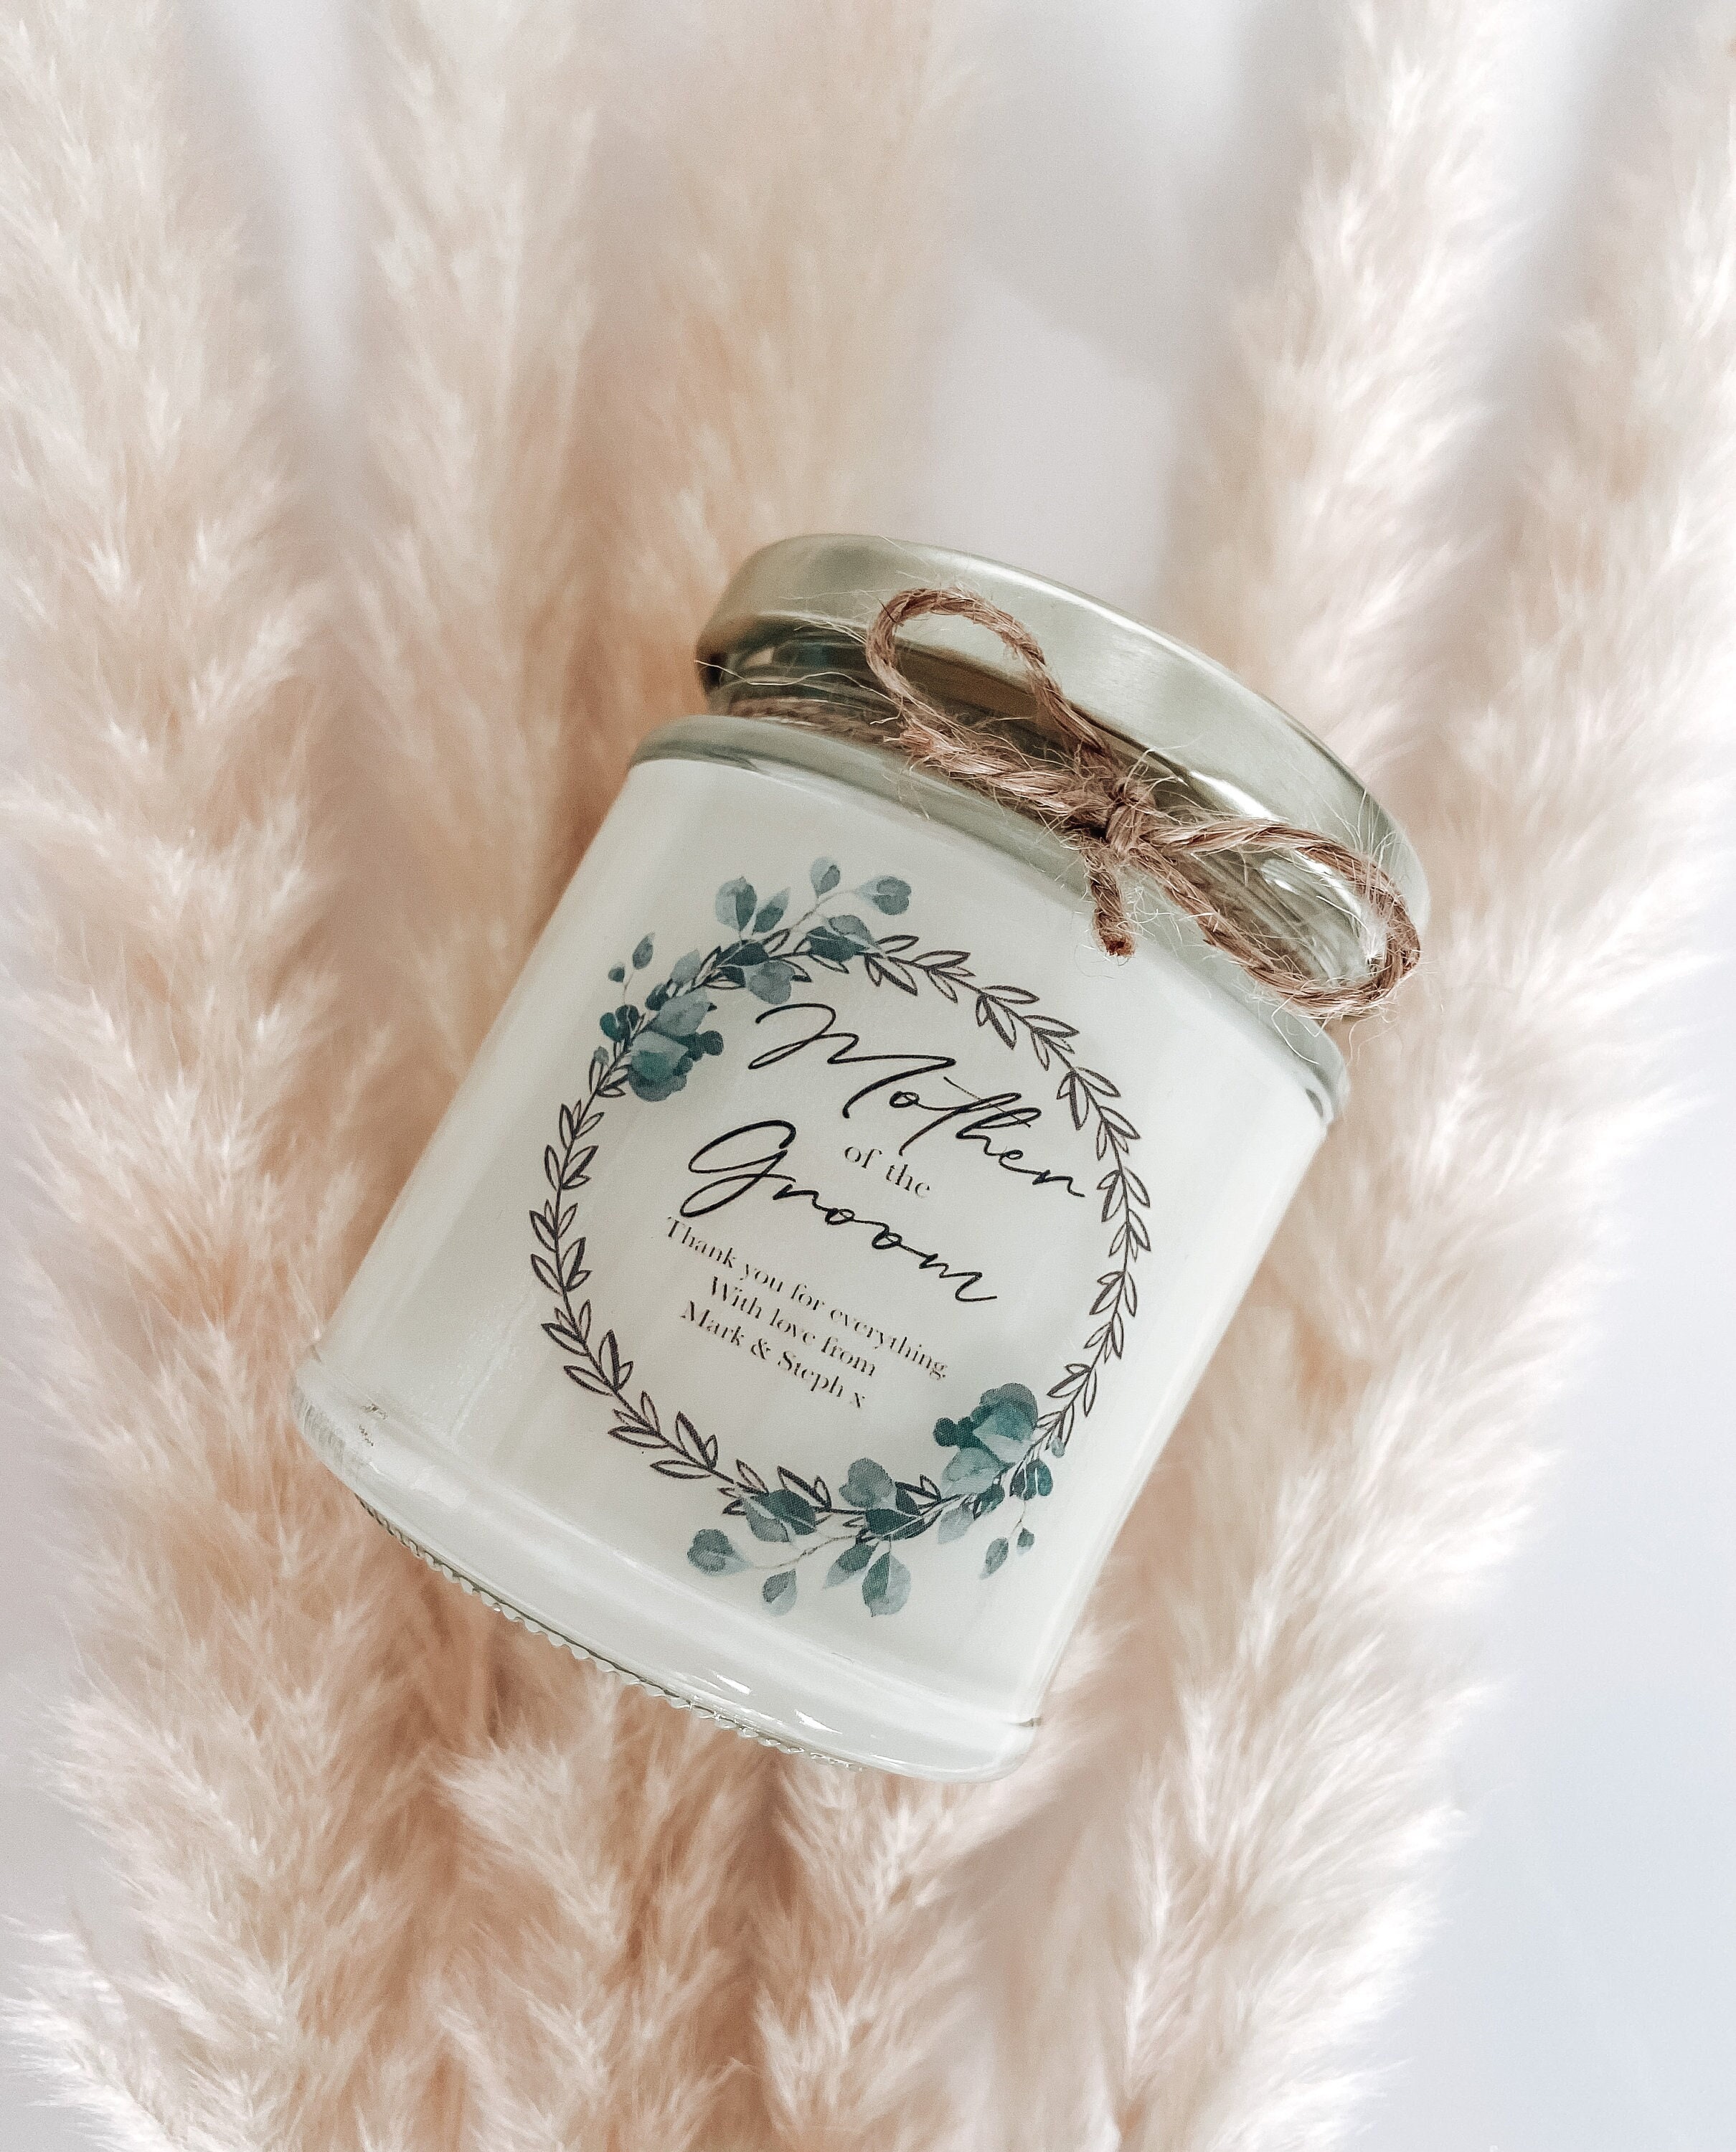 Mother of Bride Gift, Mother of Bride Candle, Gift From Bride